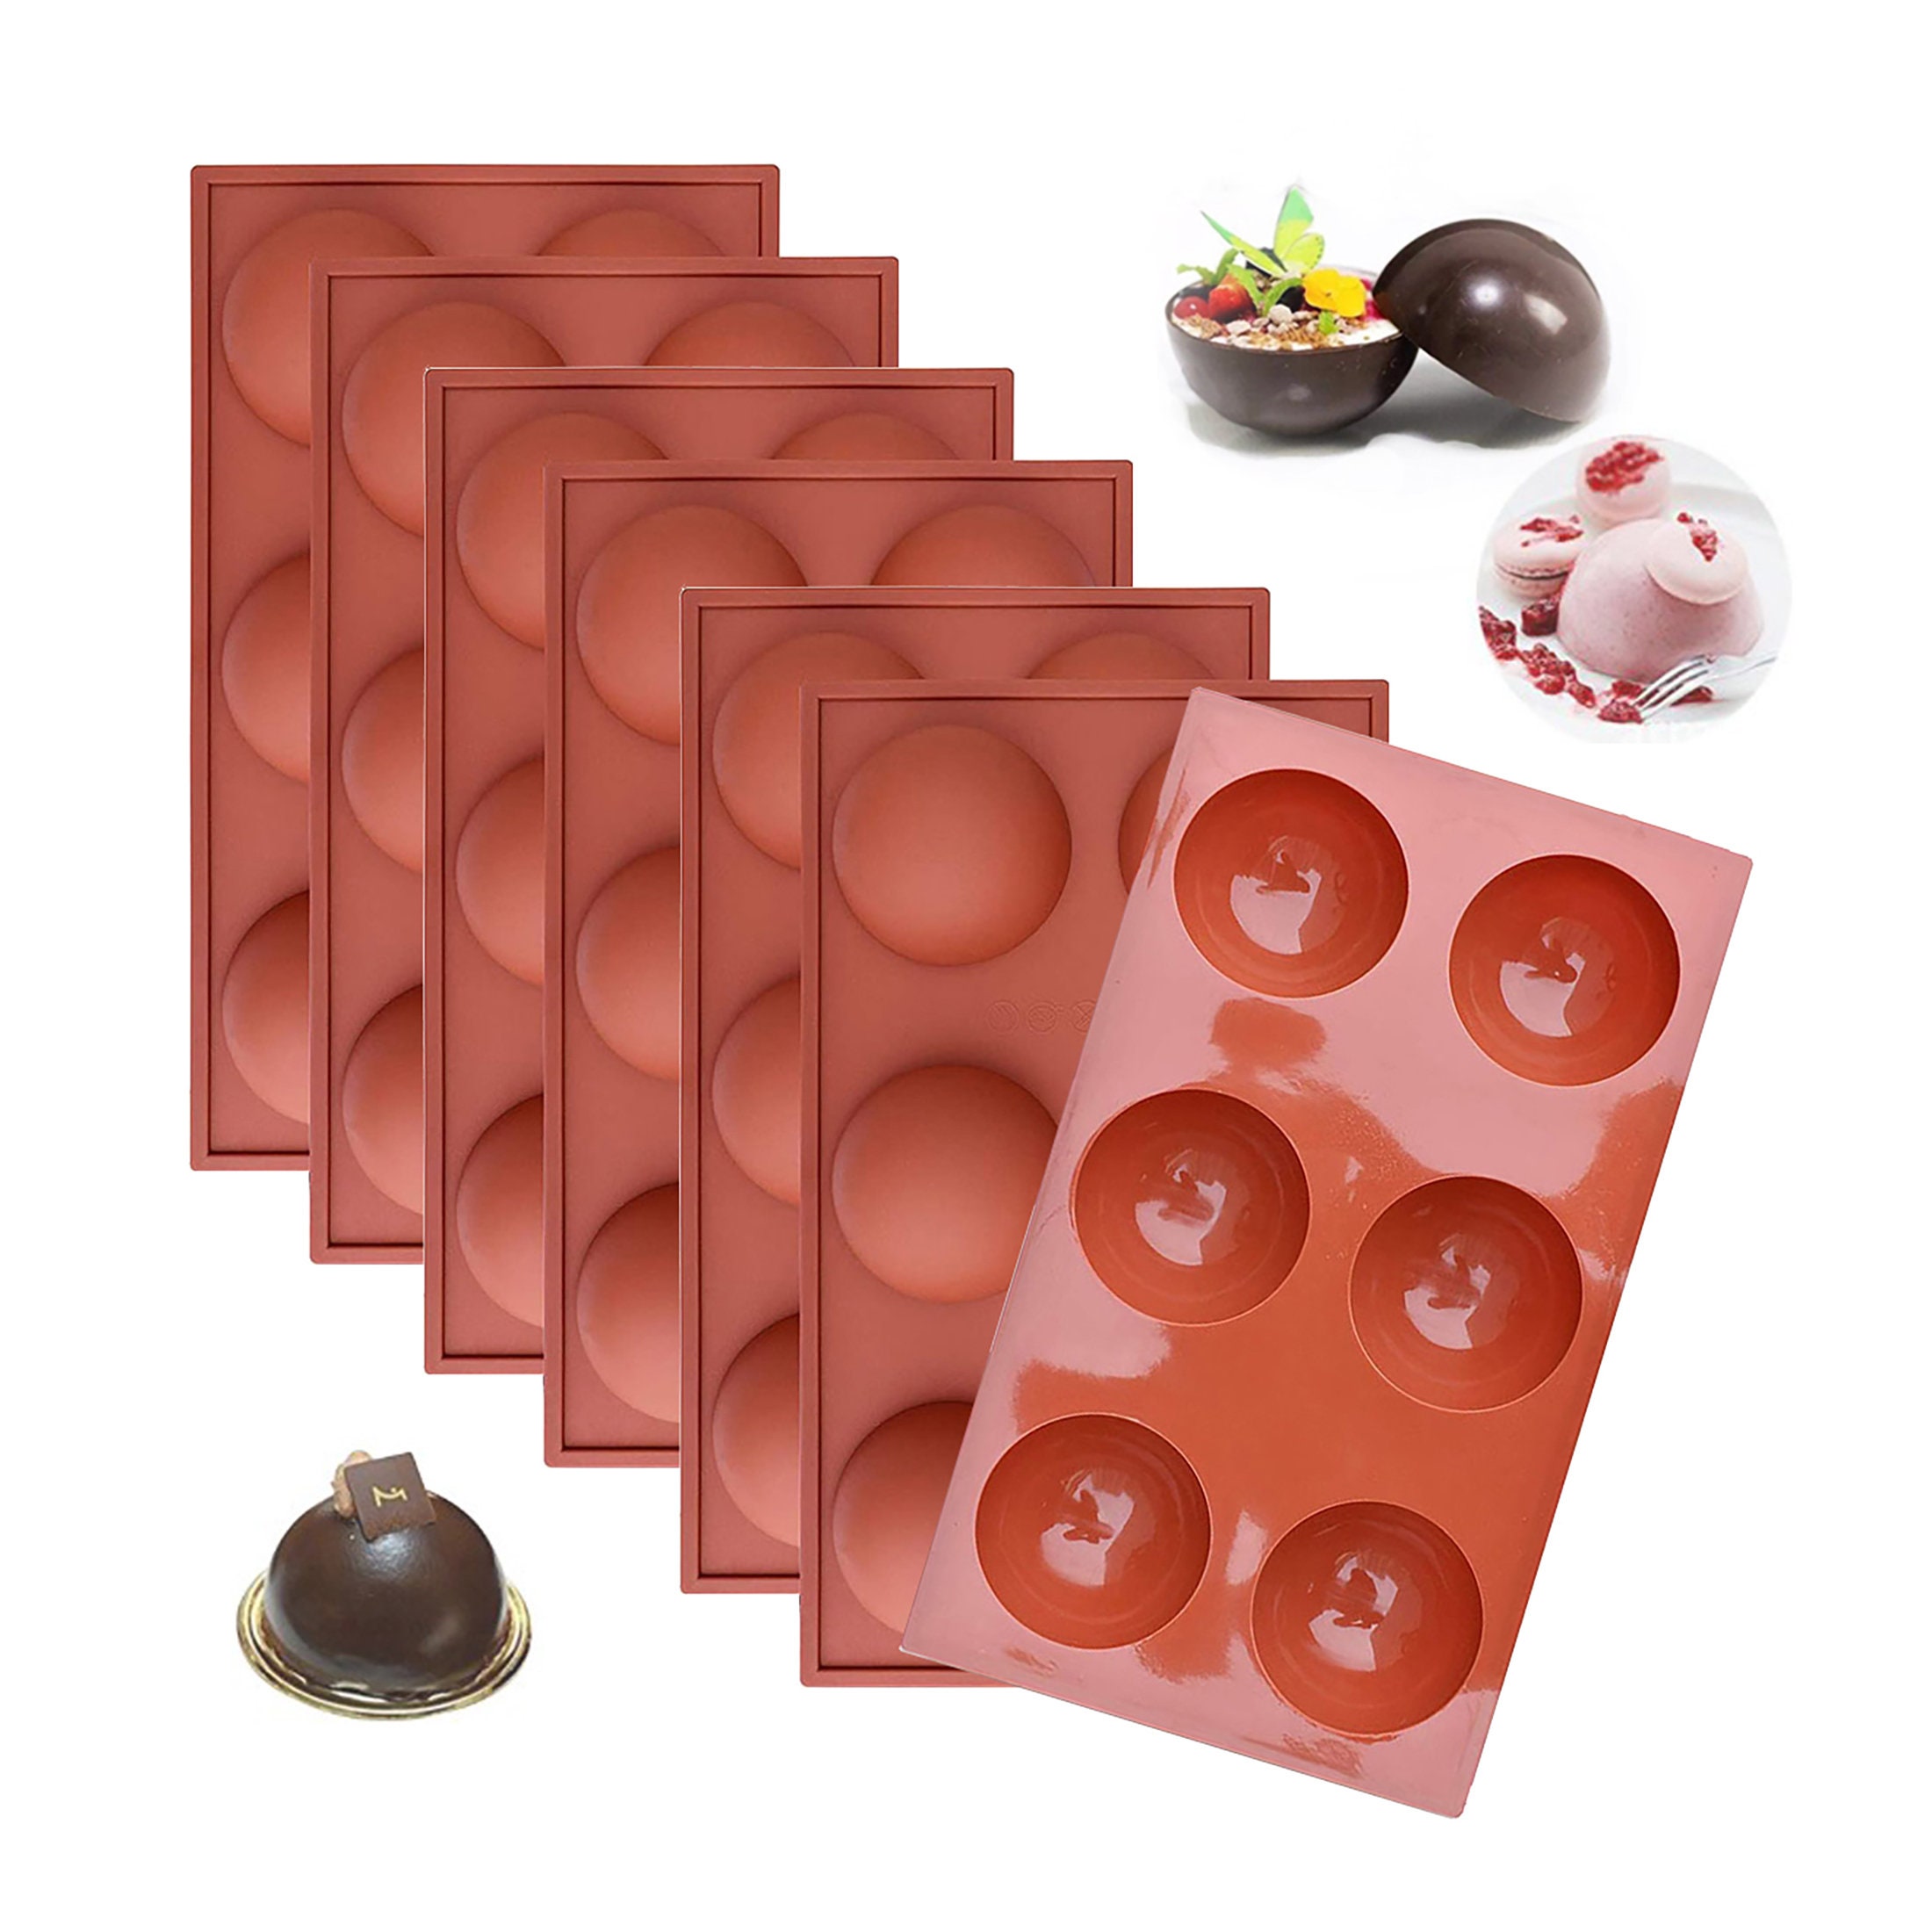 Baker Depot Semicircle Silicone Mold for Chocolate, Ice Cube, Jelly, Pudding 24